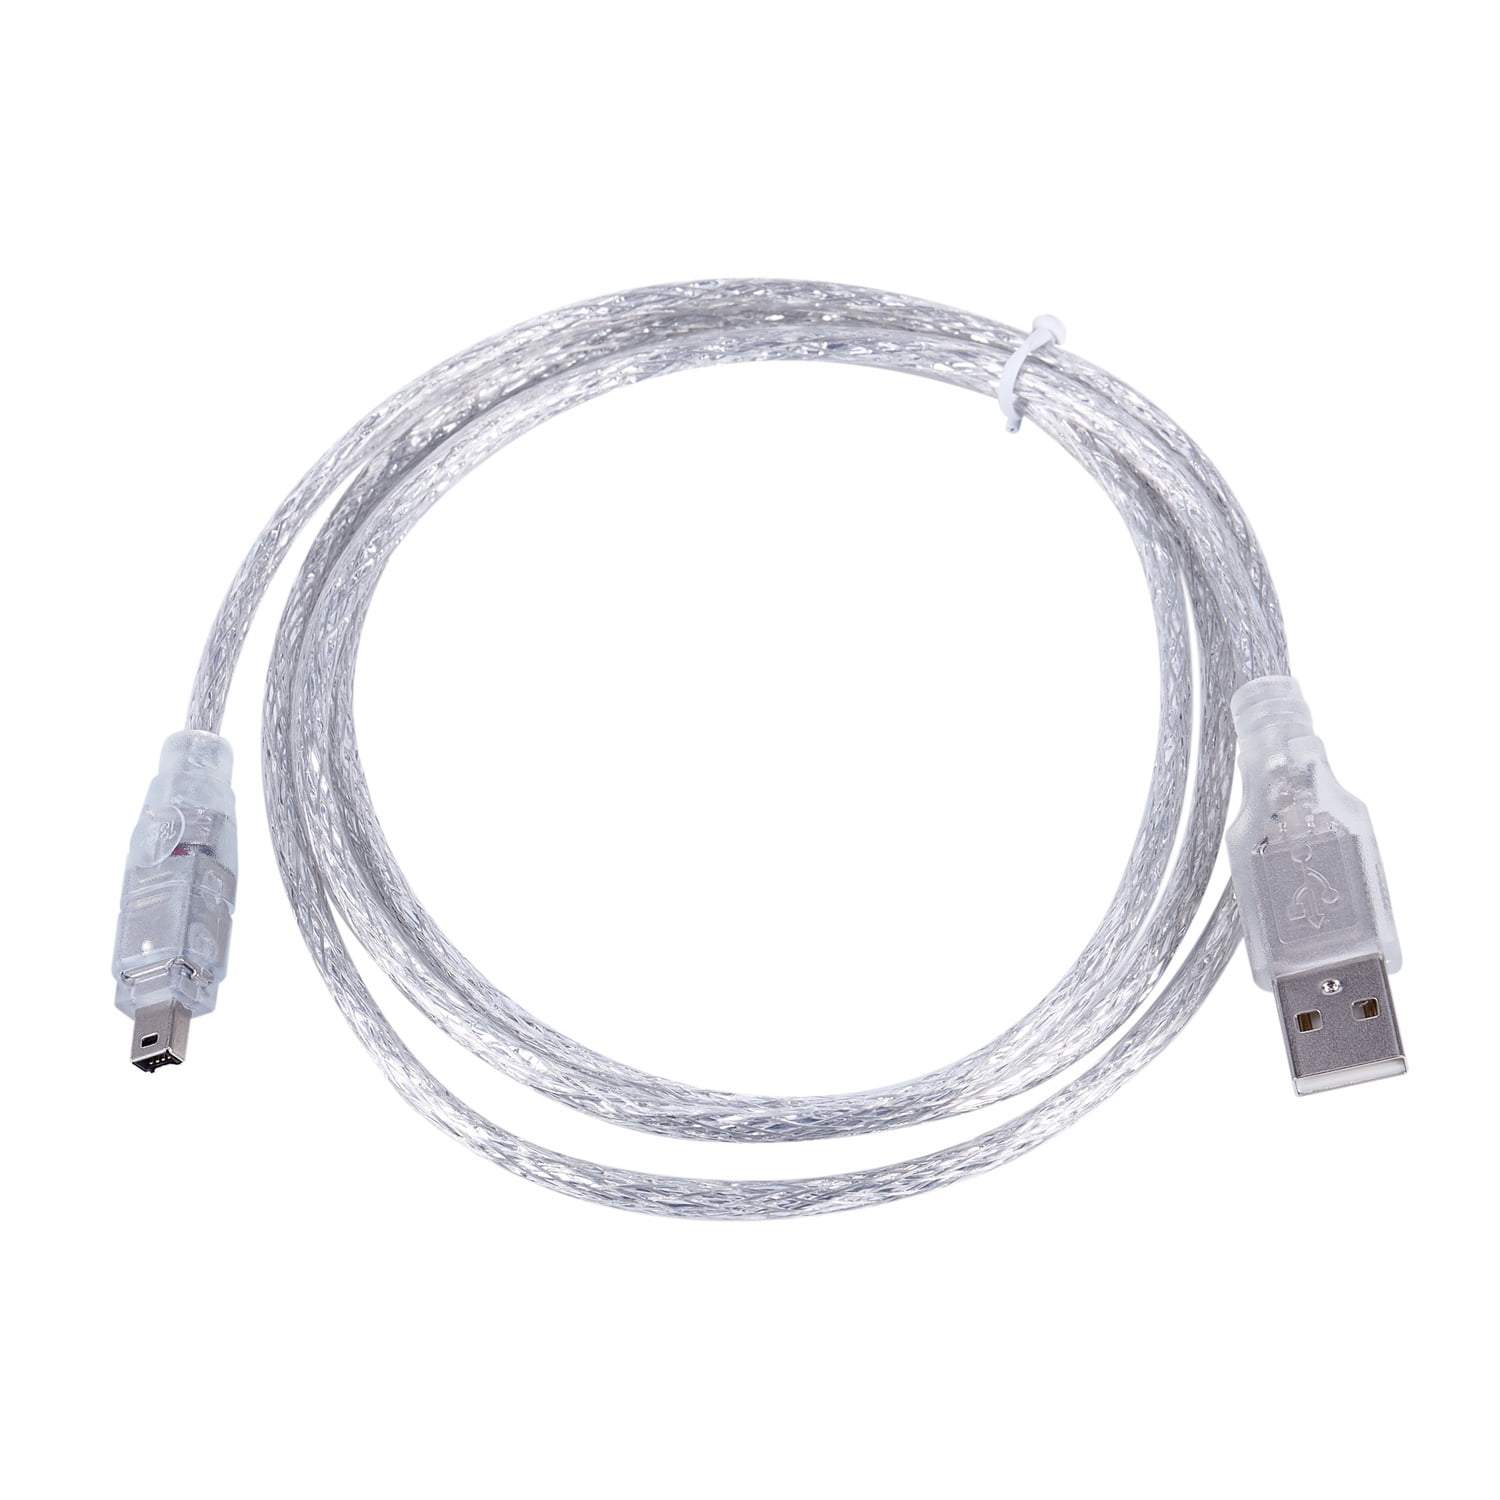 IEEE 1394 4 Pin to USB Mini Plug Firewire for Mini DV HDV Camcorder to Edit 1.5M USB Data Cable